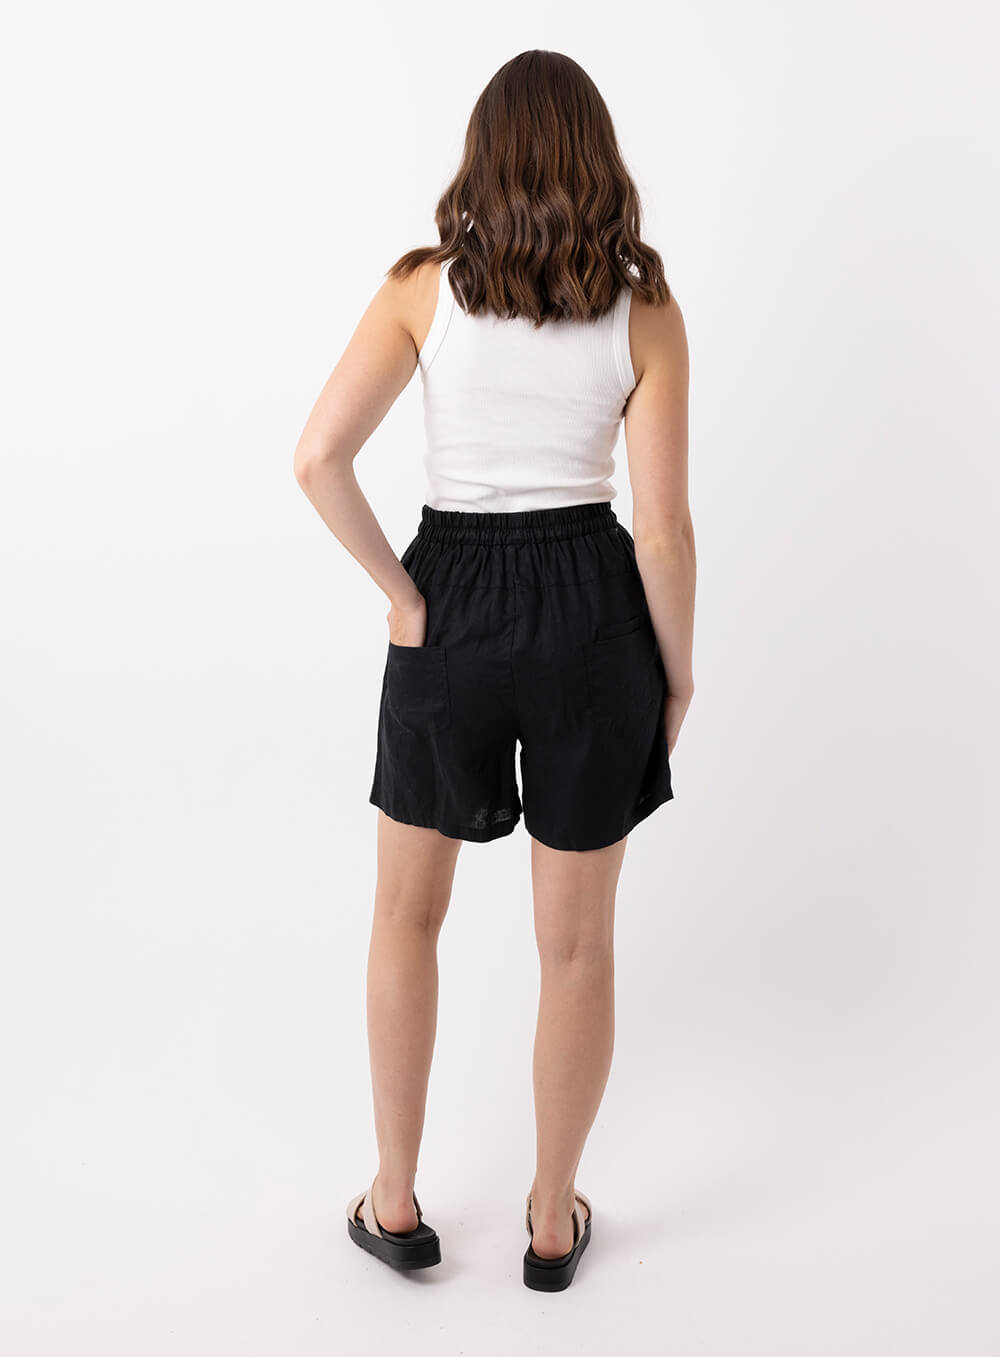 Adeline linen short in black has 20mm elestic wiast band with tie. It has 2 side pockets, is mid thigh length with 100% breathabe linen fabric.. 